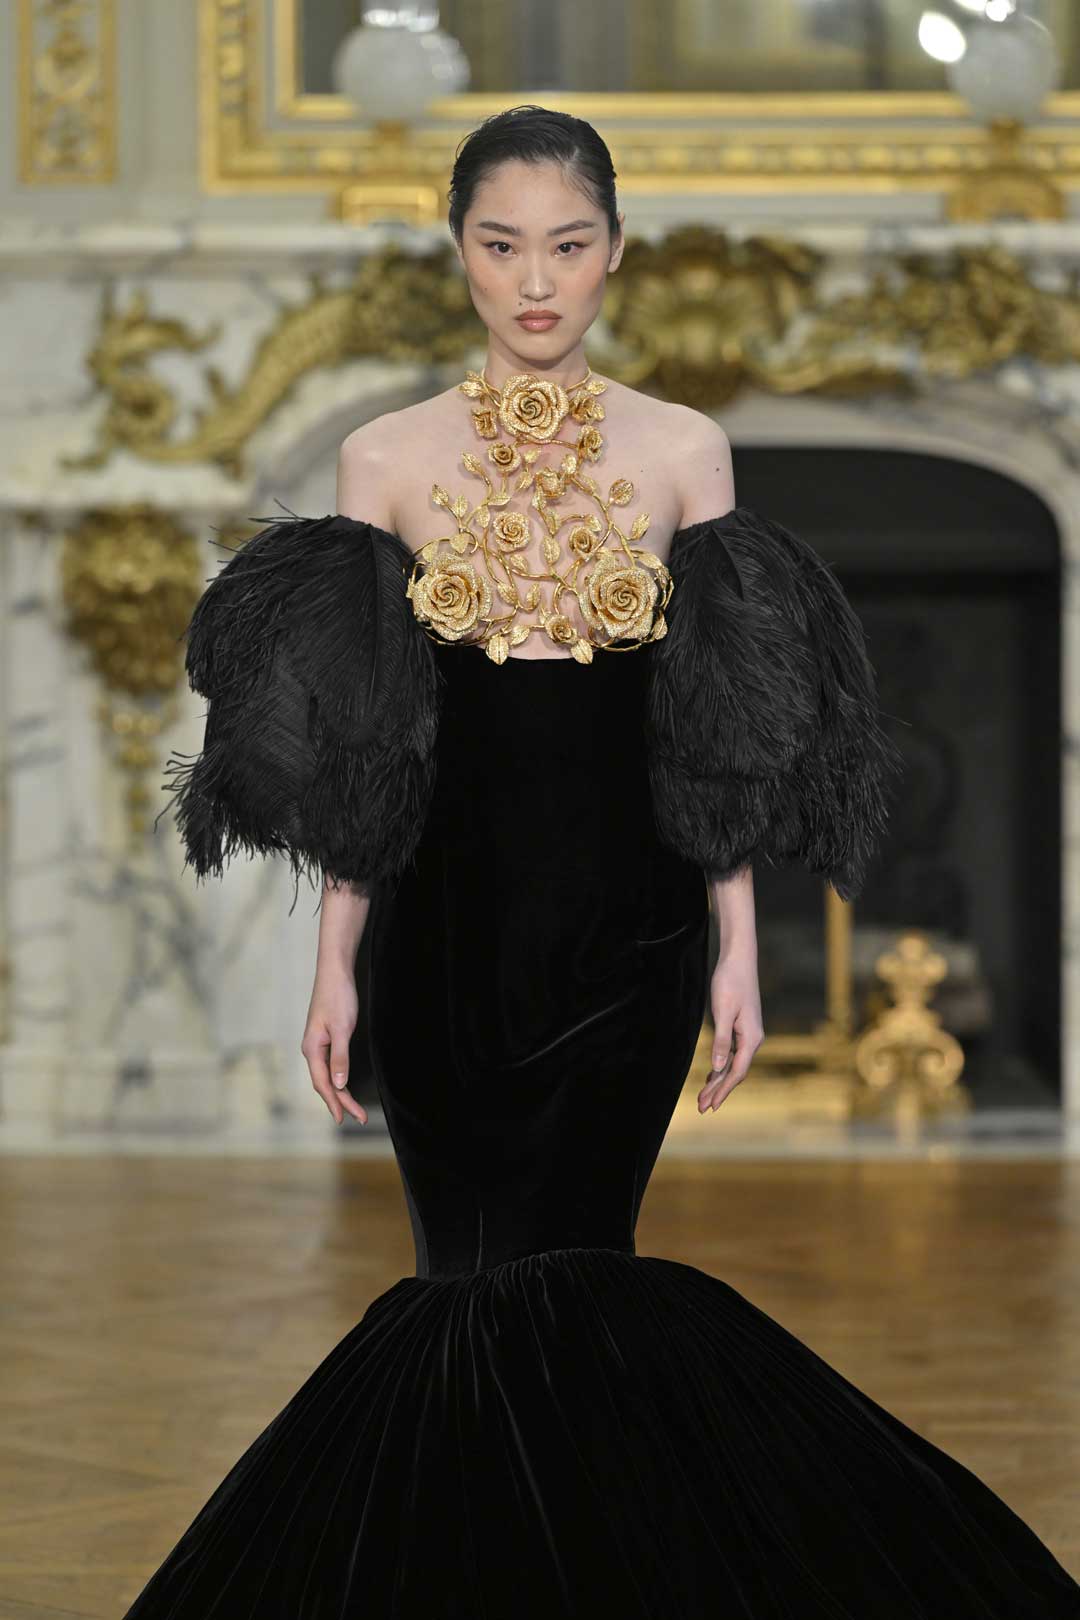 PARIS, FRANCE - JANUARY 22: (EDITORIAL USE ONLY - For Non-Editorial use please seek approval from Fashion House) A model walks the runway during the Tamara Ralph Haute Couture Spring/Summer 2024 show as part of Paris Fashion Week on January 22, 2024 in Paris, France. (Photo by Kristy Sparow/Getty Images)